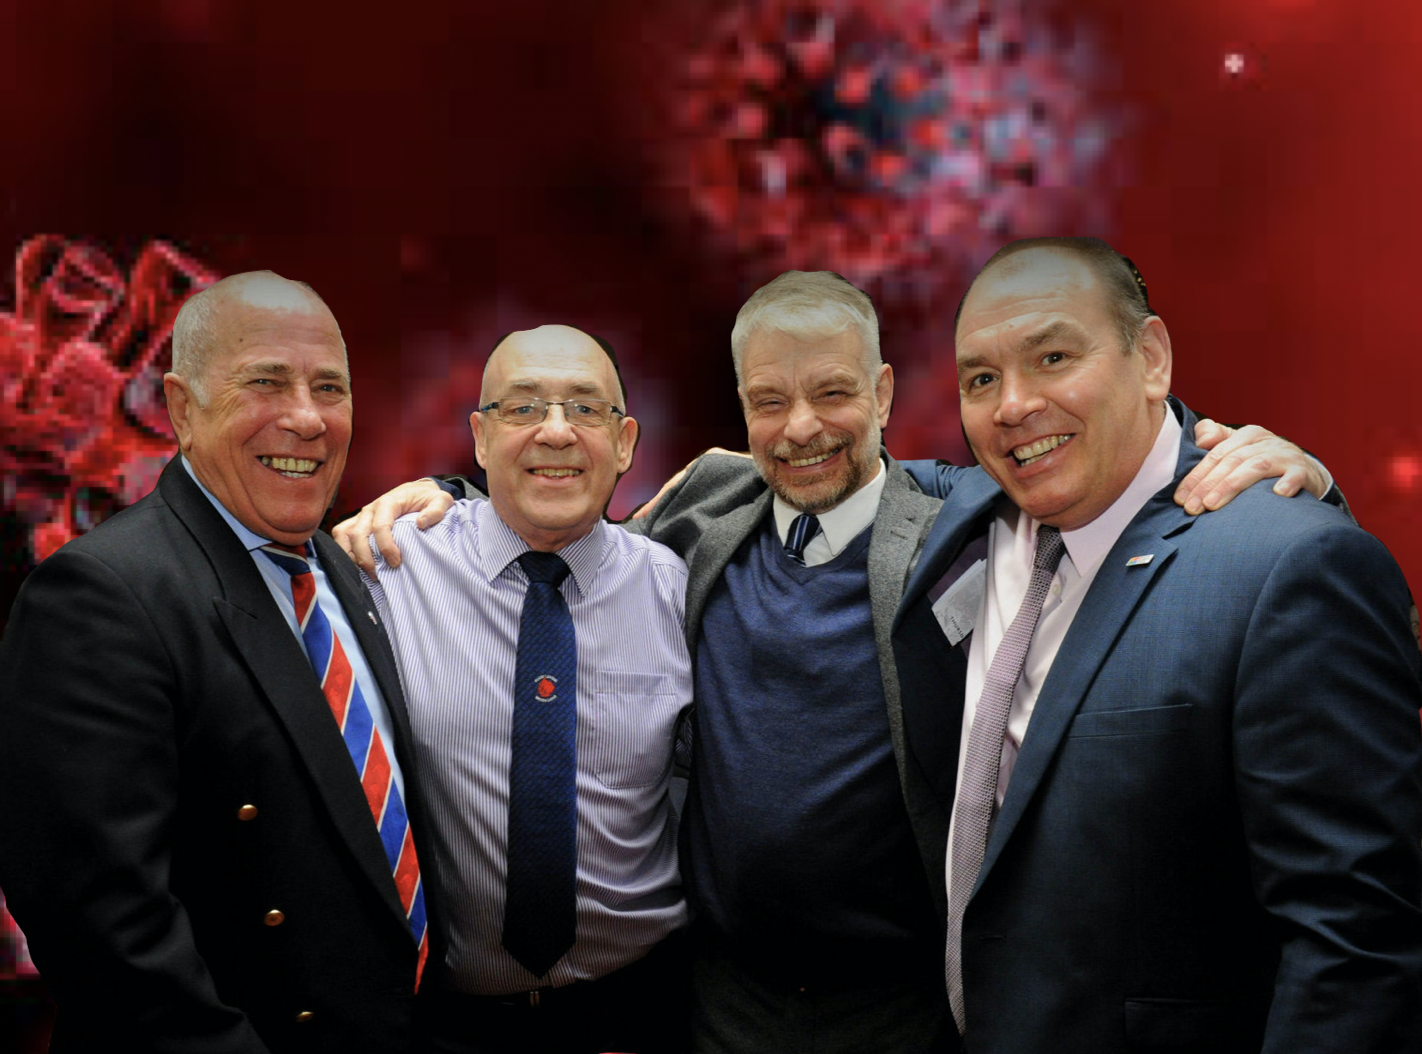 Rugby League family supporting the sport’s retired heroes